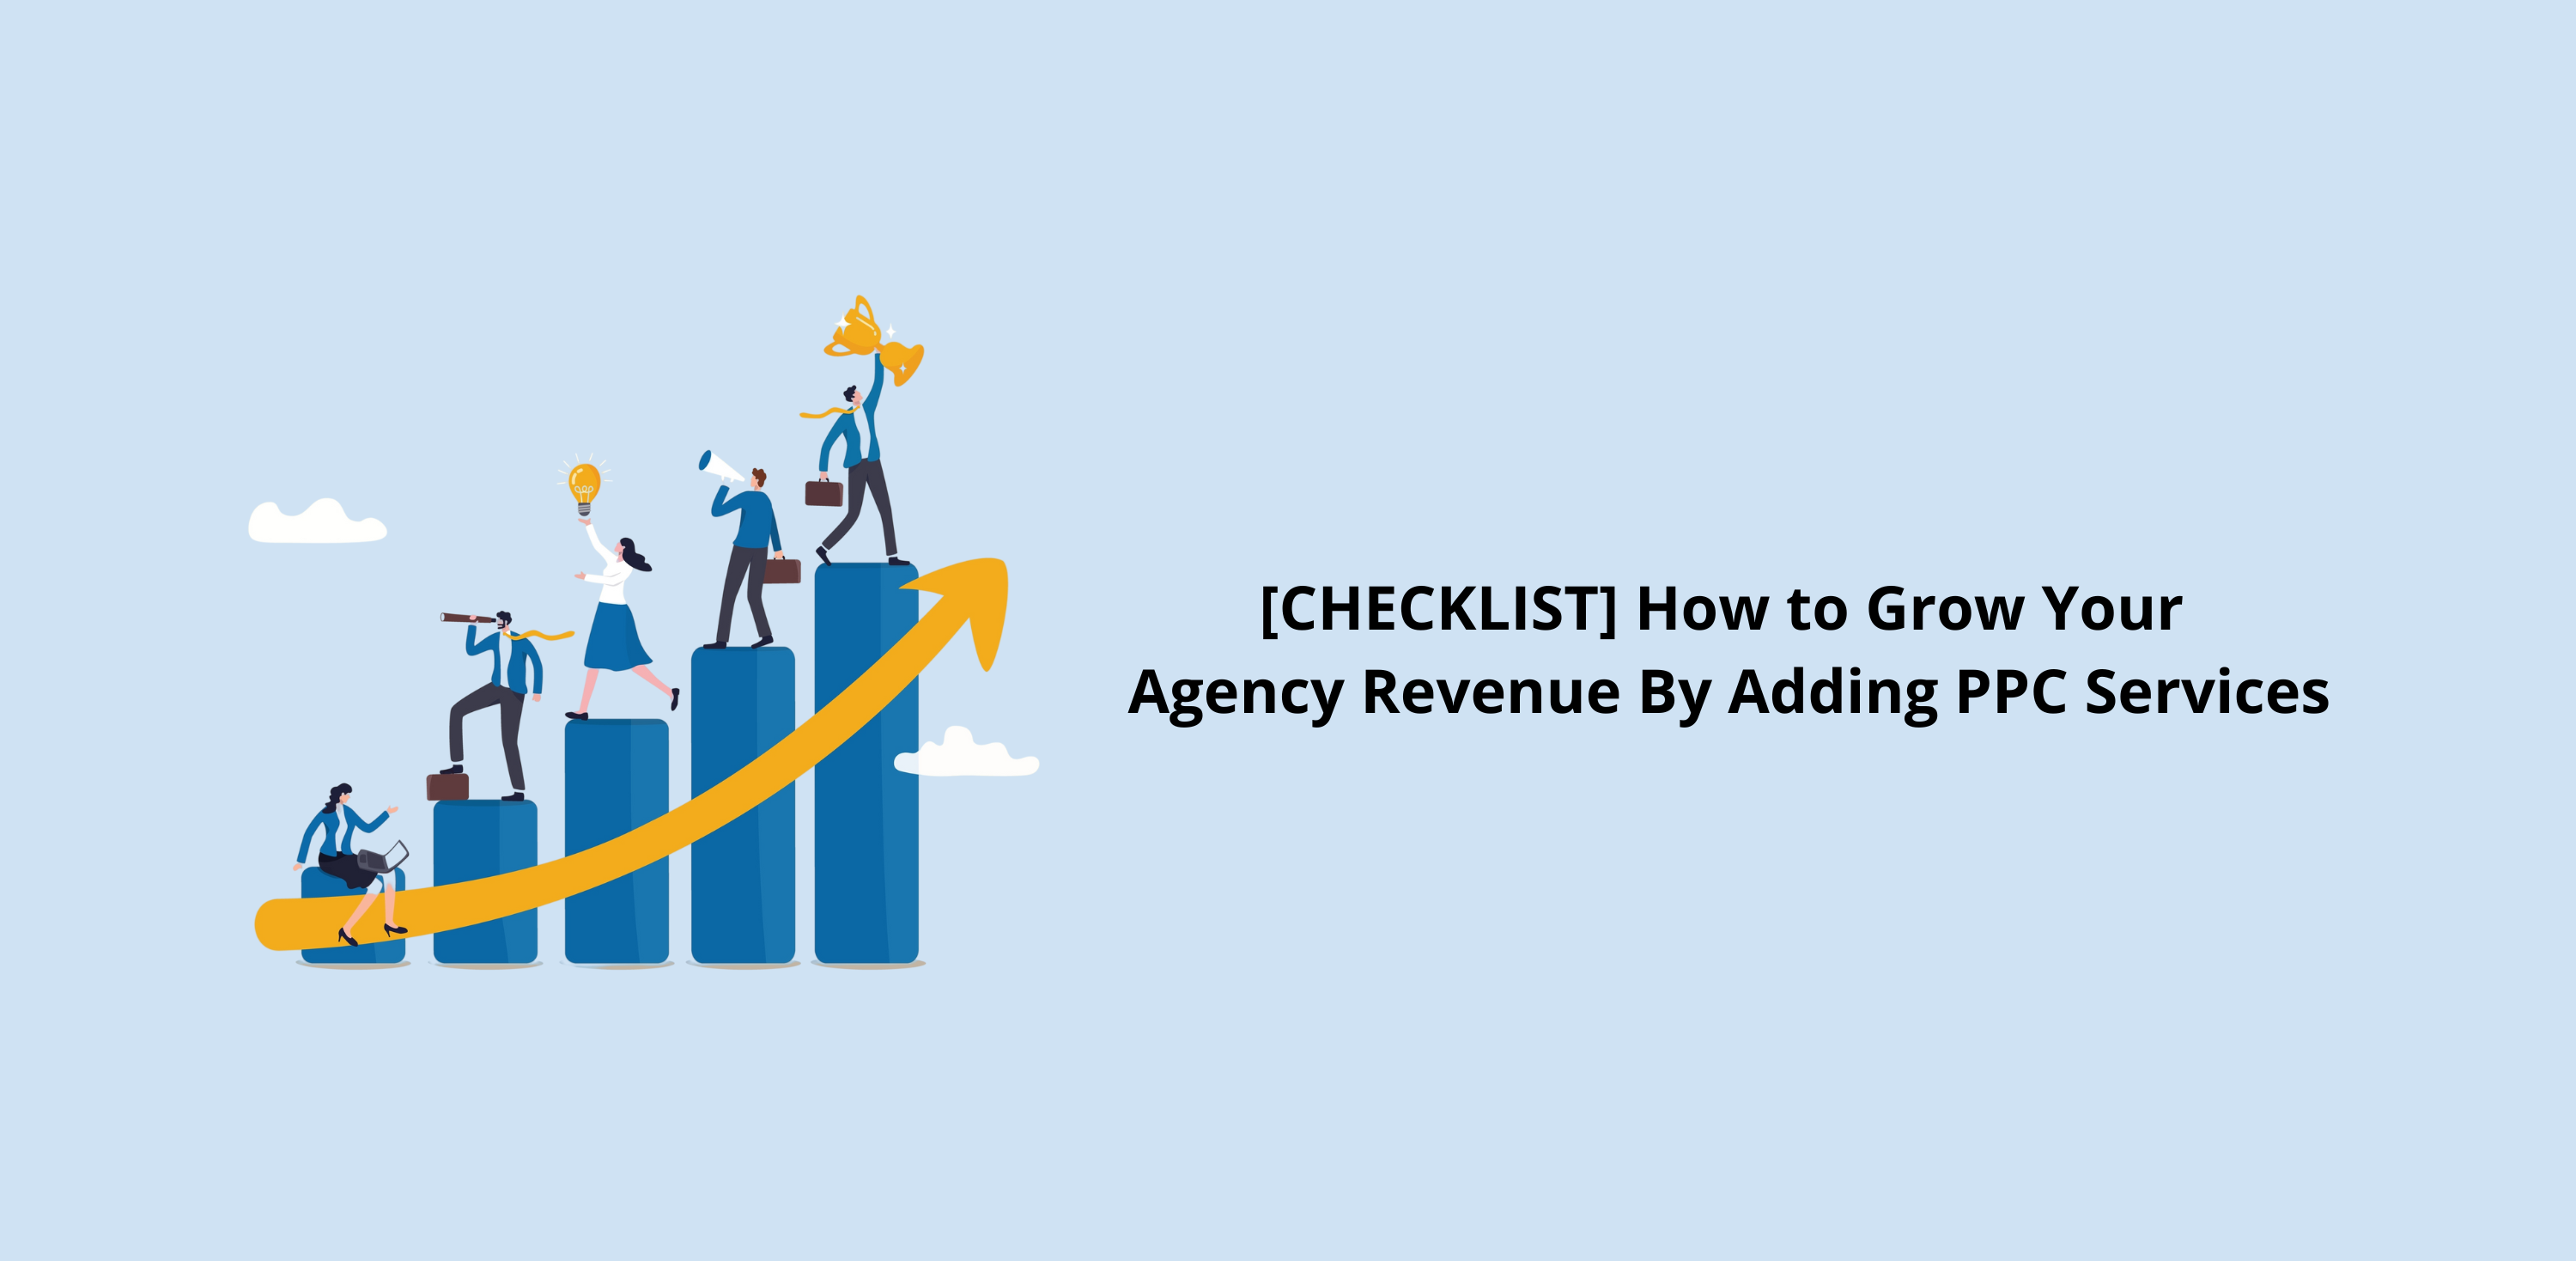 [CHECKLIST] How to Grow Your Agency Revenue By Adding PPC Services